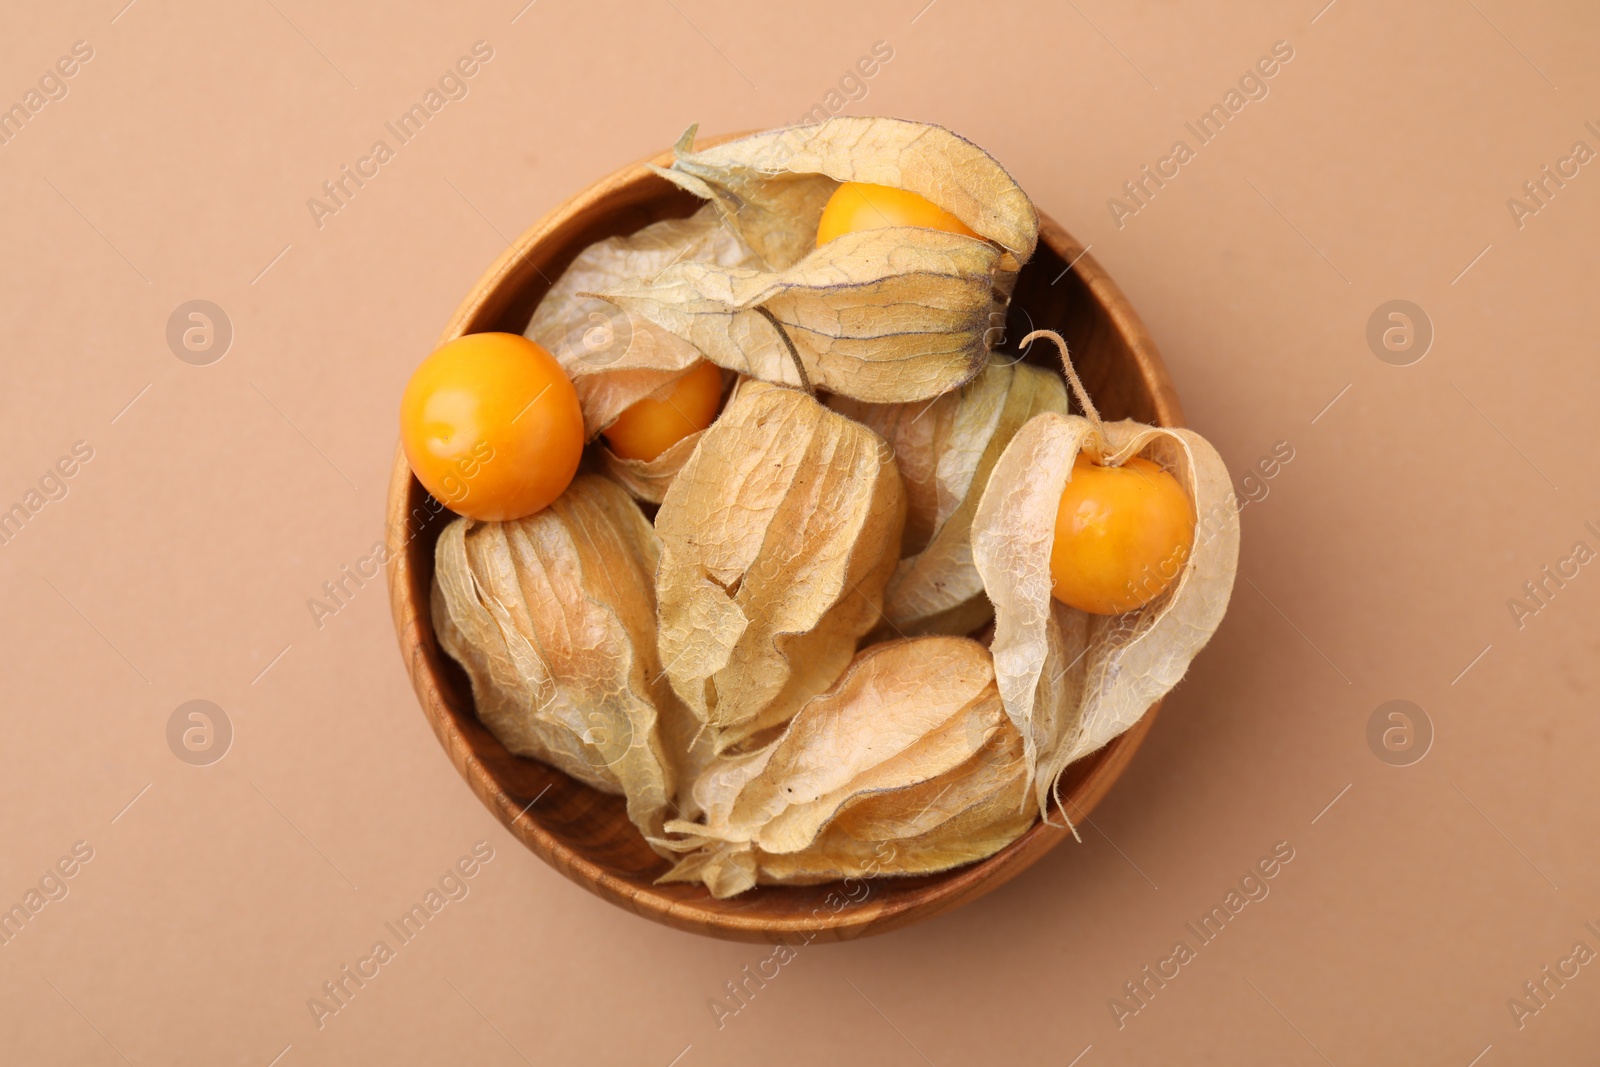 Photo of Ripe physalis fruits with calyxes in bowl on beige background, top view